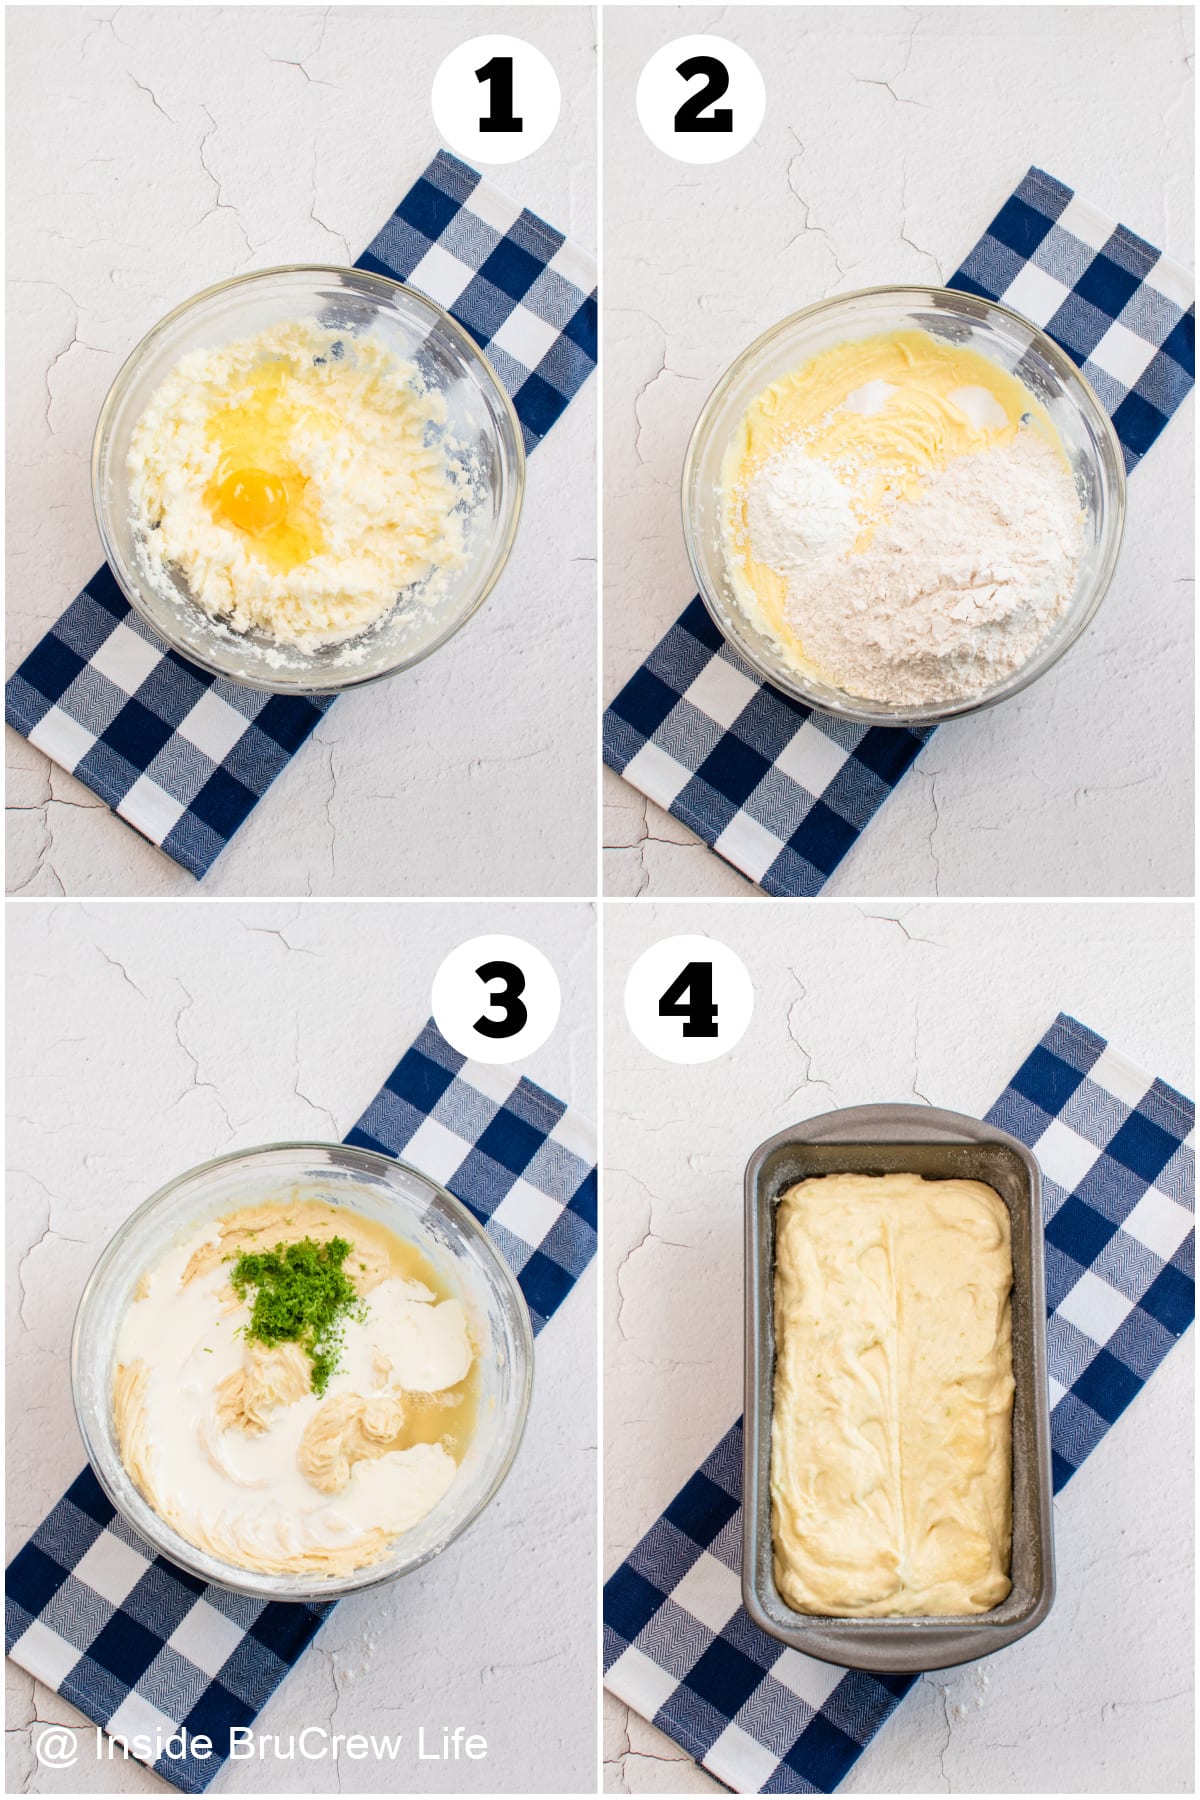 Four pictures collaged together showing how to make pound cake batter.